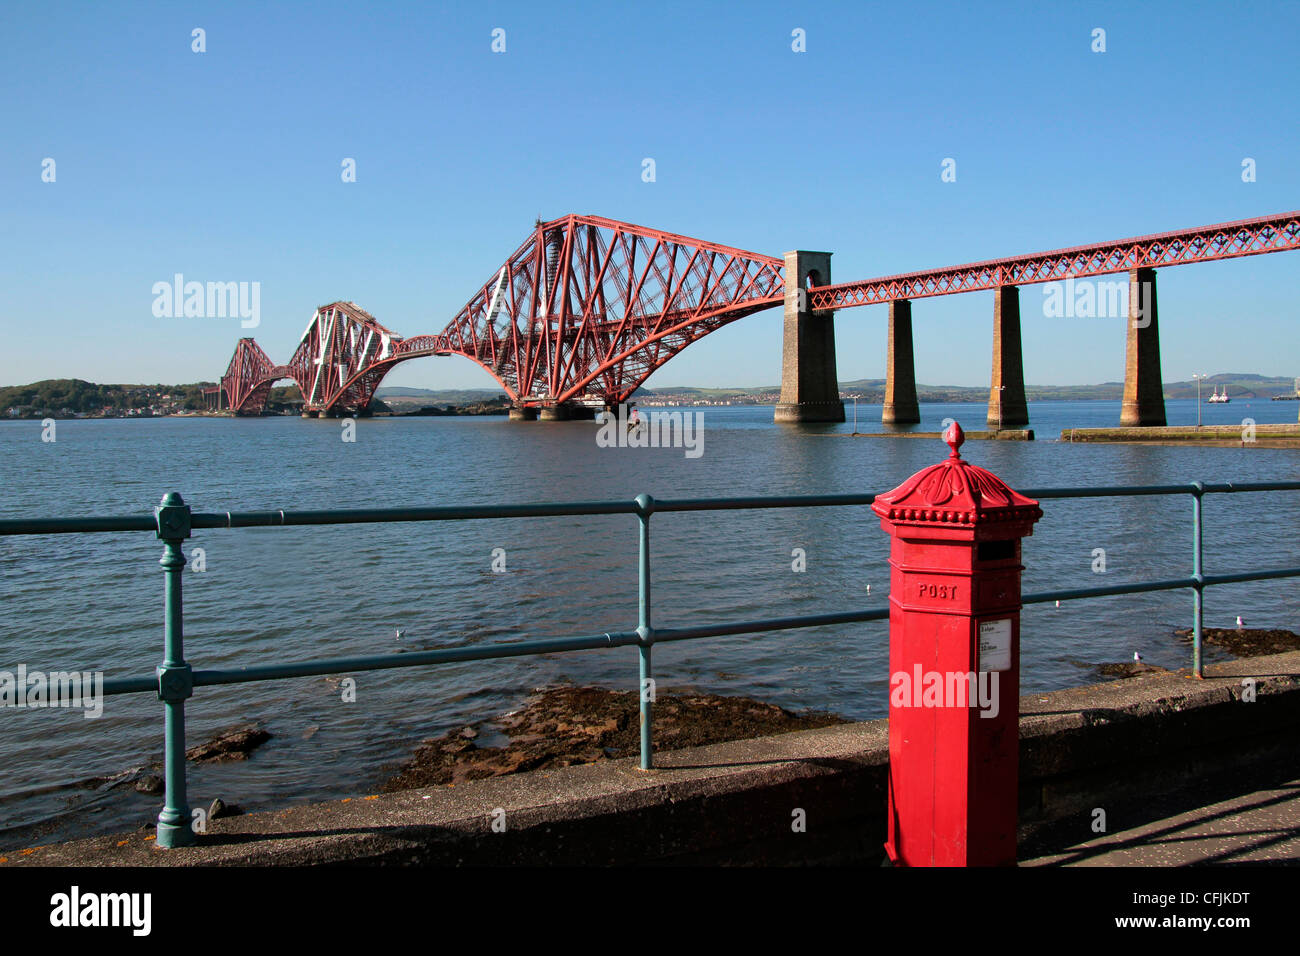 Forth Bridge over the Firth of Forth, South Queensferry, Scotland, United Kingdom, Europe Stock Photo